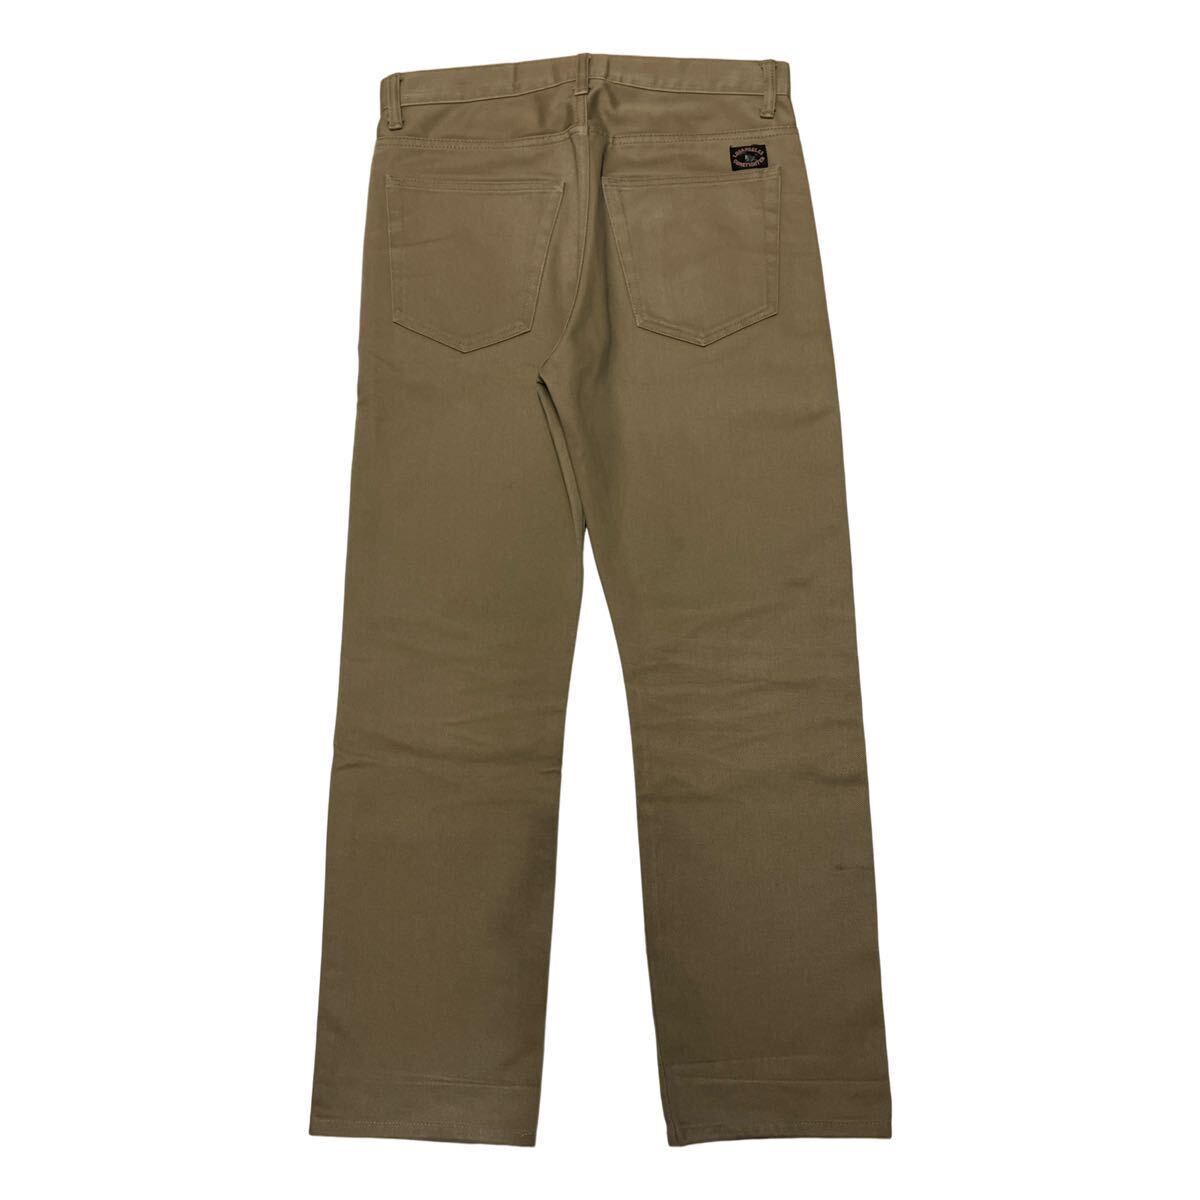 CORE FIGHTER core Fighter cotton pants chinos beige S